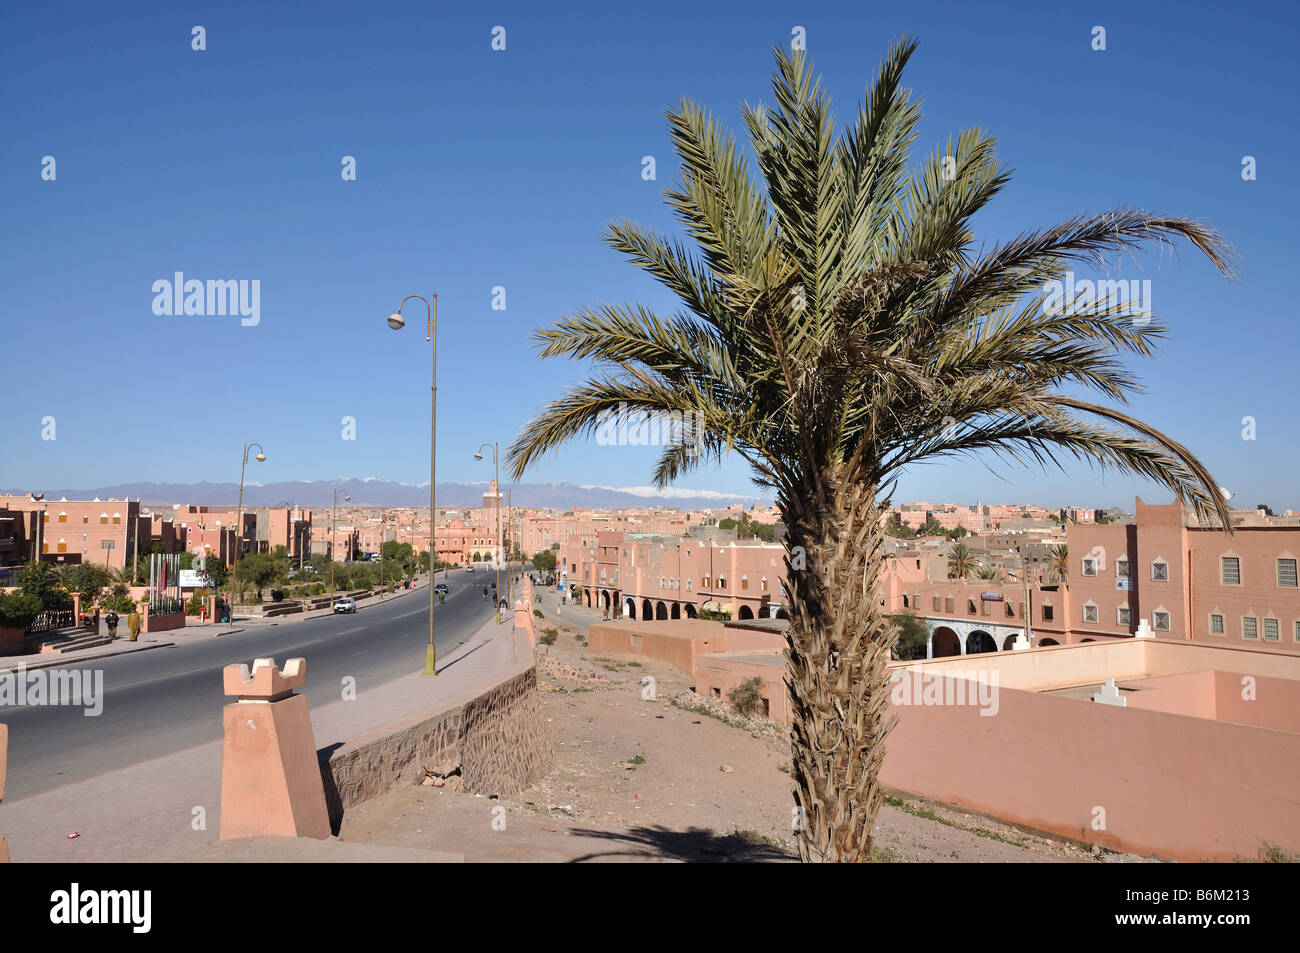 Street in the City of Ouarzazate, Morocco Stock Photo